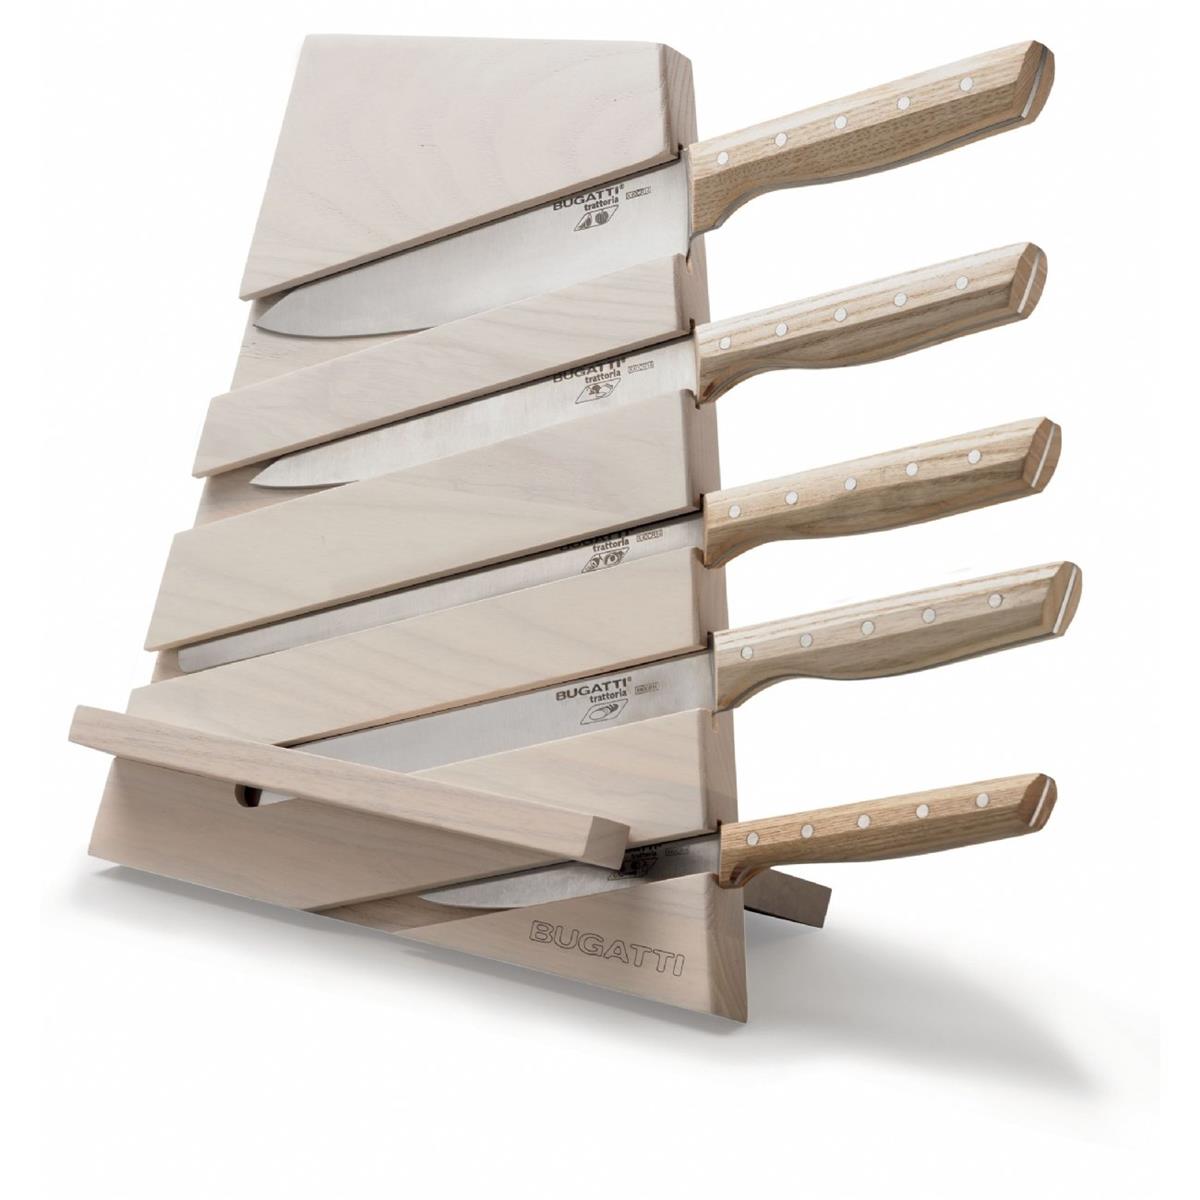 CEPPO TRATTORIA - Bleached Ash with Chopping Board and Lectern - 5 Knives with Wooden Handle